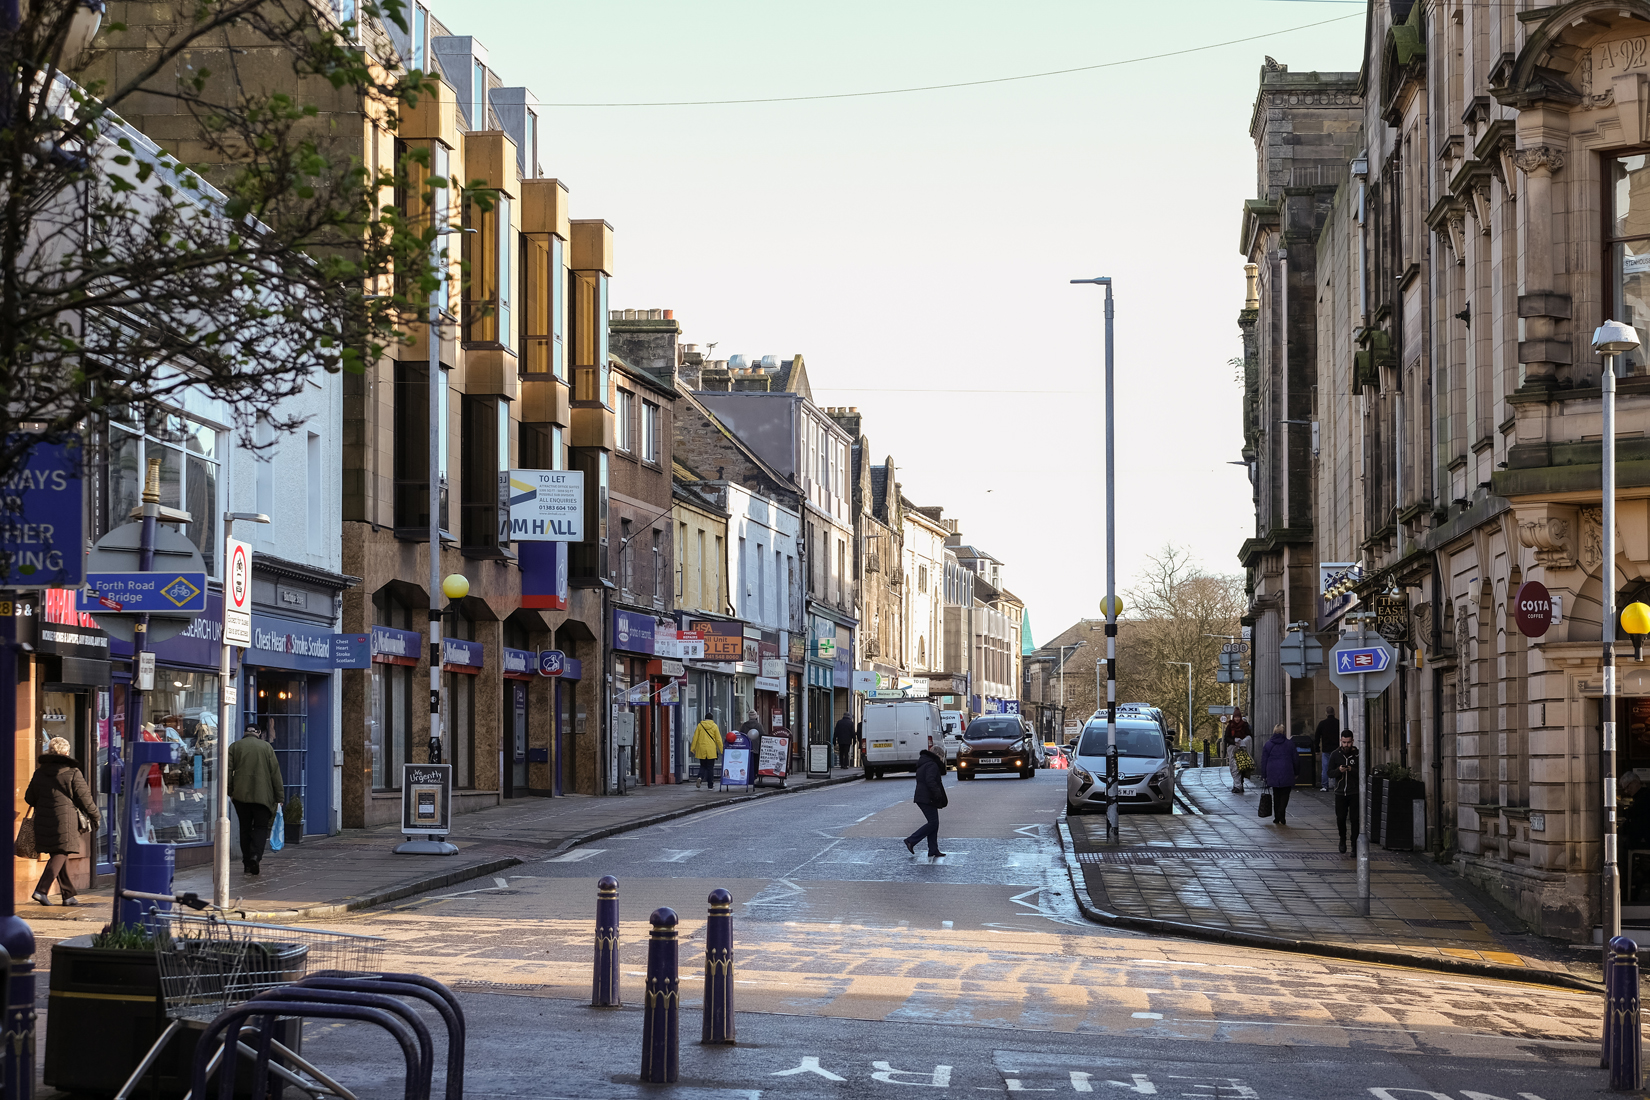 High street with pavements, car driving towards and pedestrian on zebra crossing. Buildings on right look over 100 years old of stone and the left are more modern.